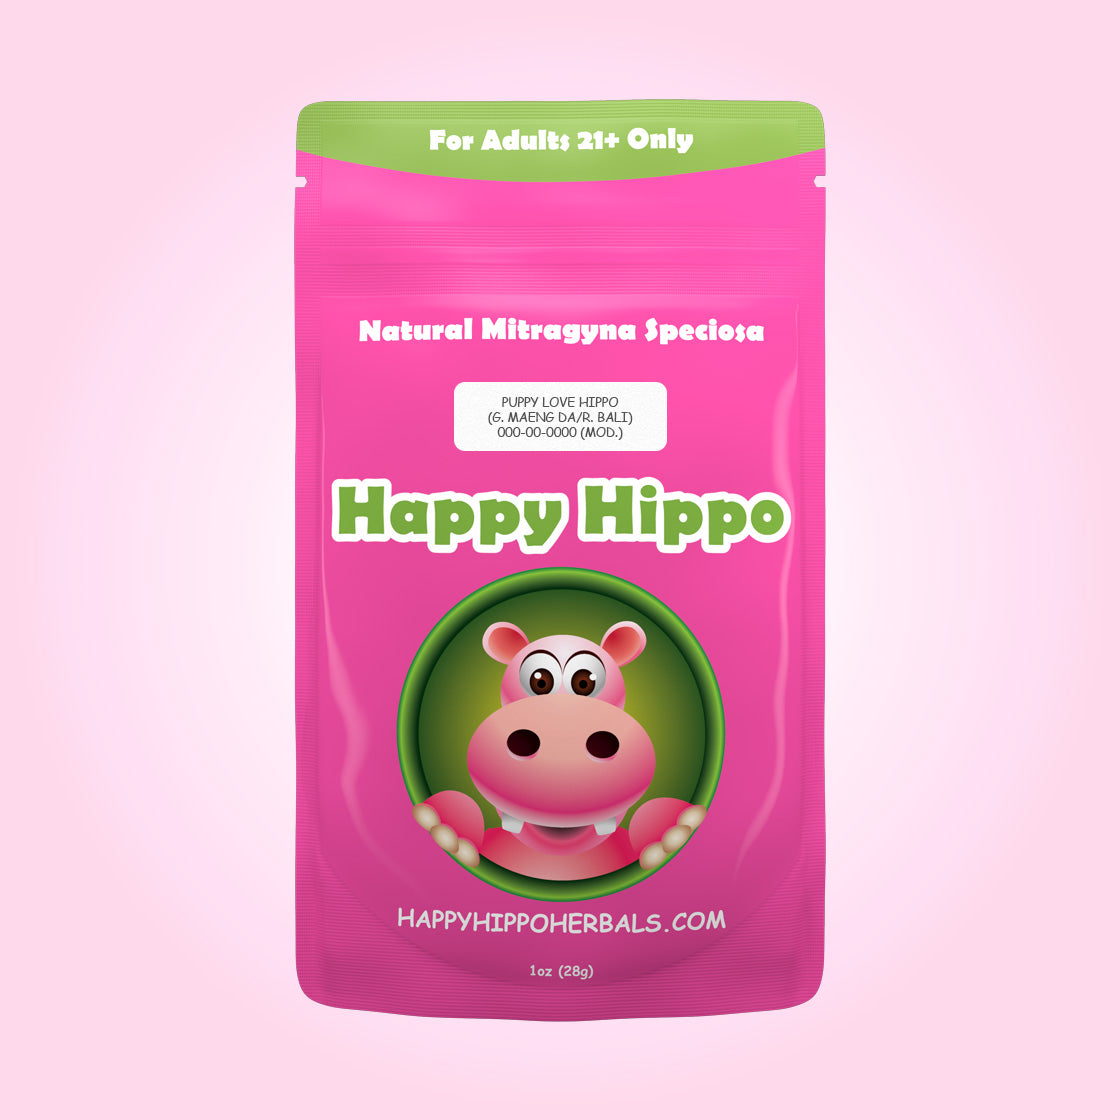 Product Image depicting a 1oz bag of Happy Hippo Blended Green Maeng Da and Red Bali Kratom Powder (Mitragyna Speciosa).